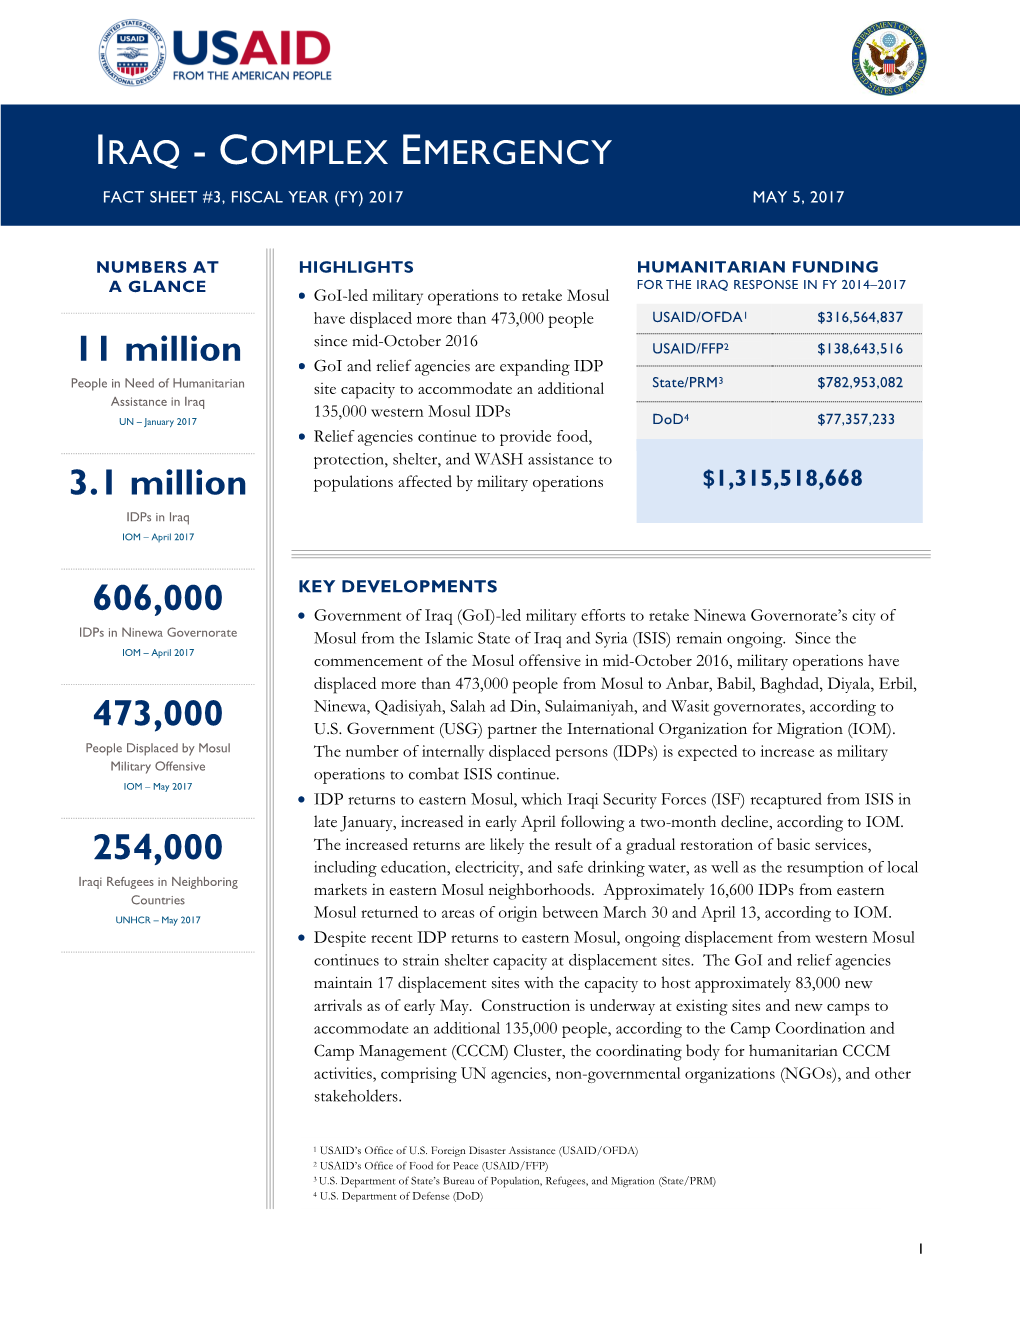 Iraq - Complex Emergency Fact Sheet #3, Fiscal Year (Fy) 2017 May 5, 2017